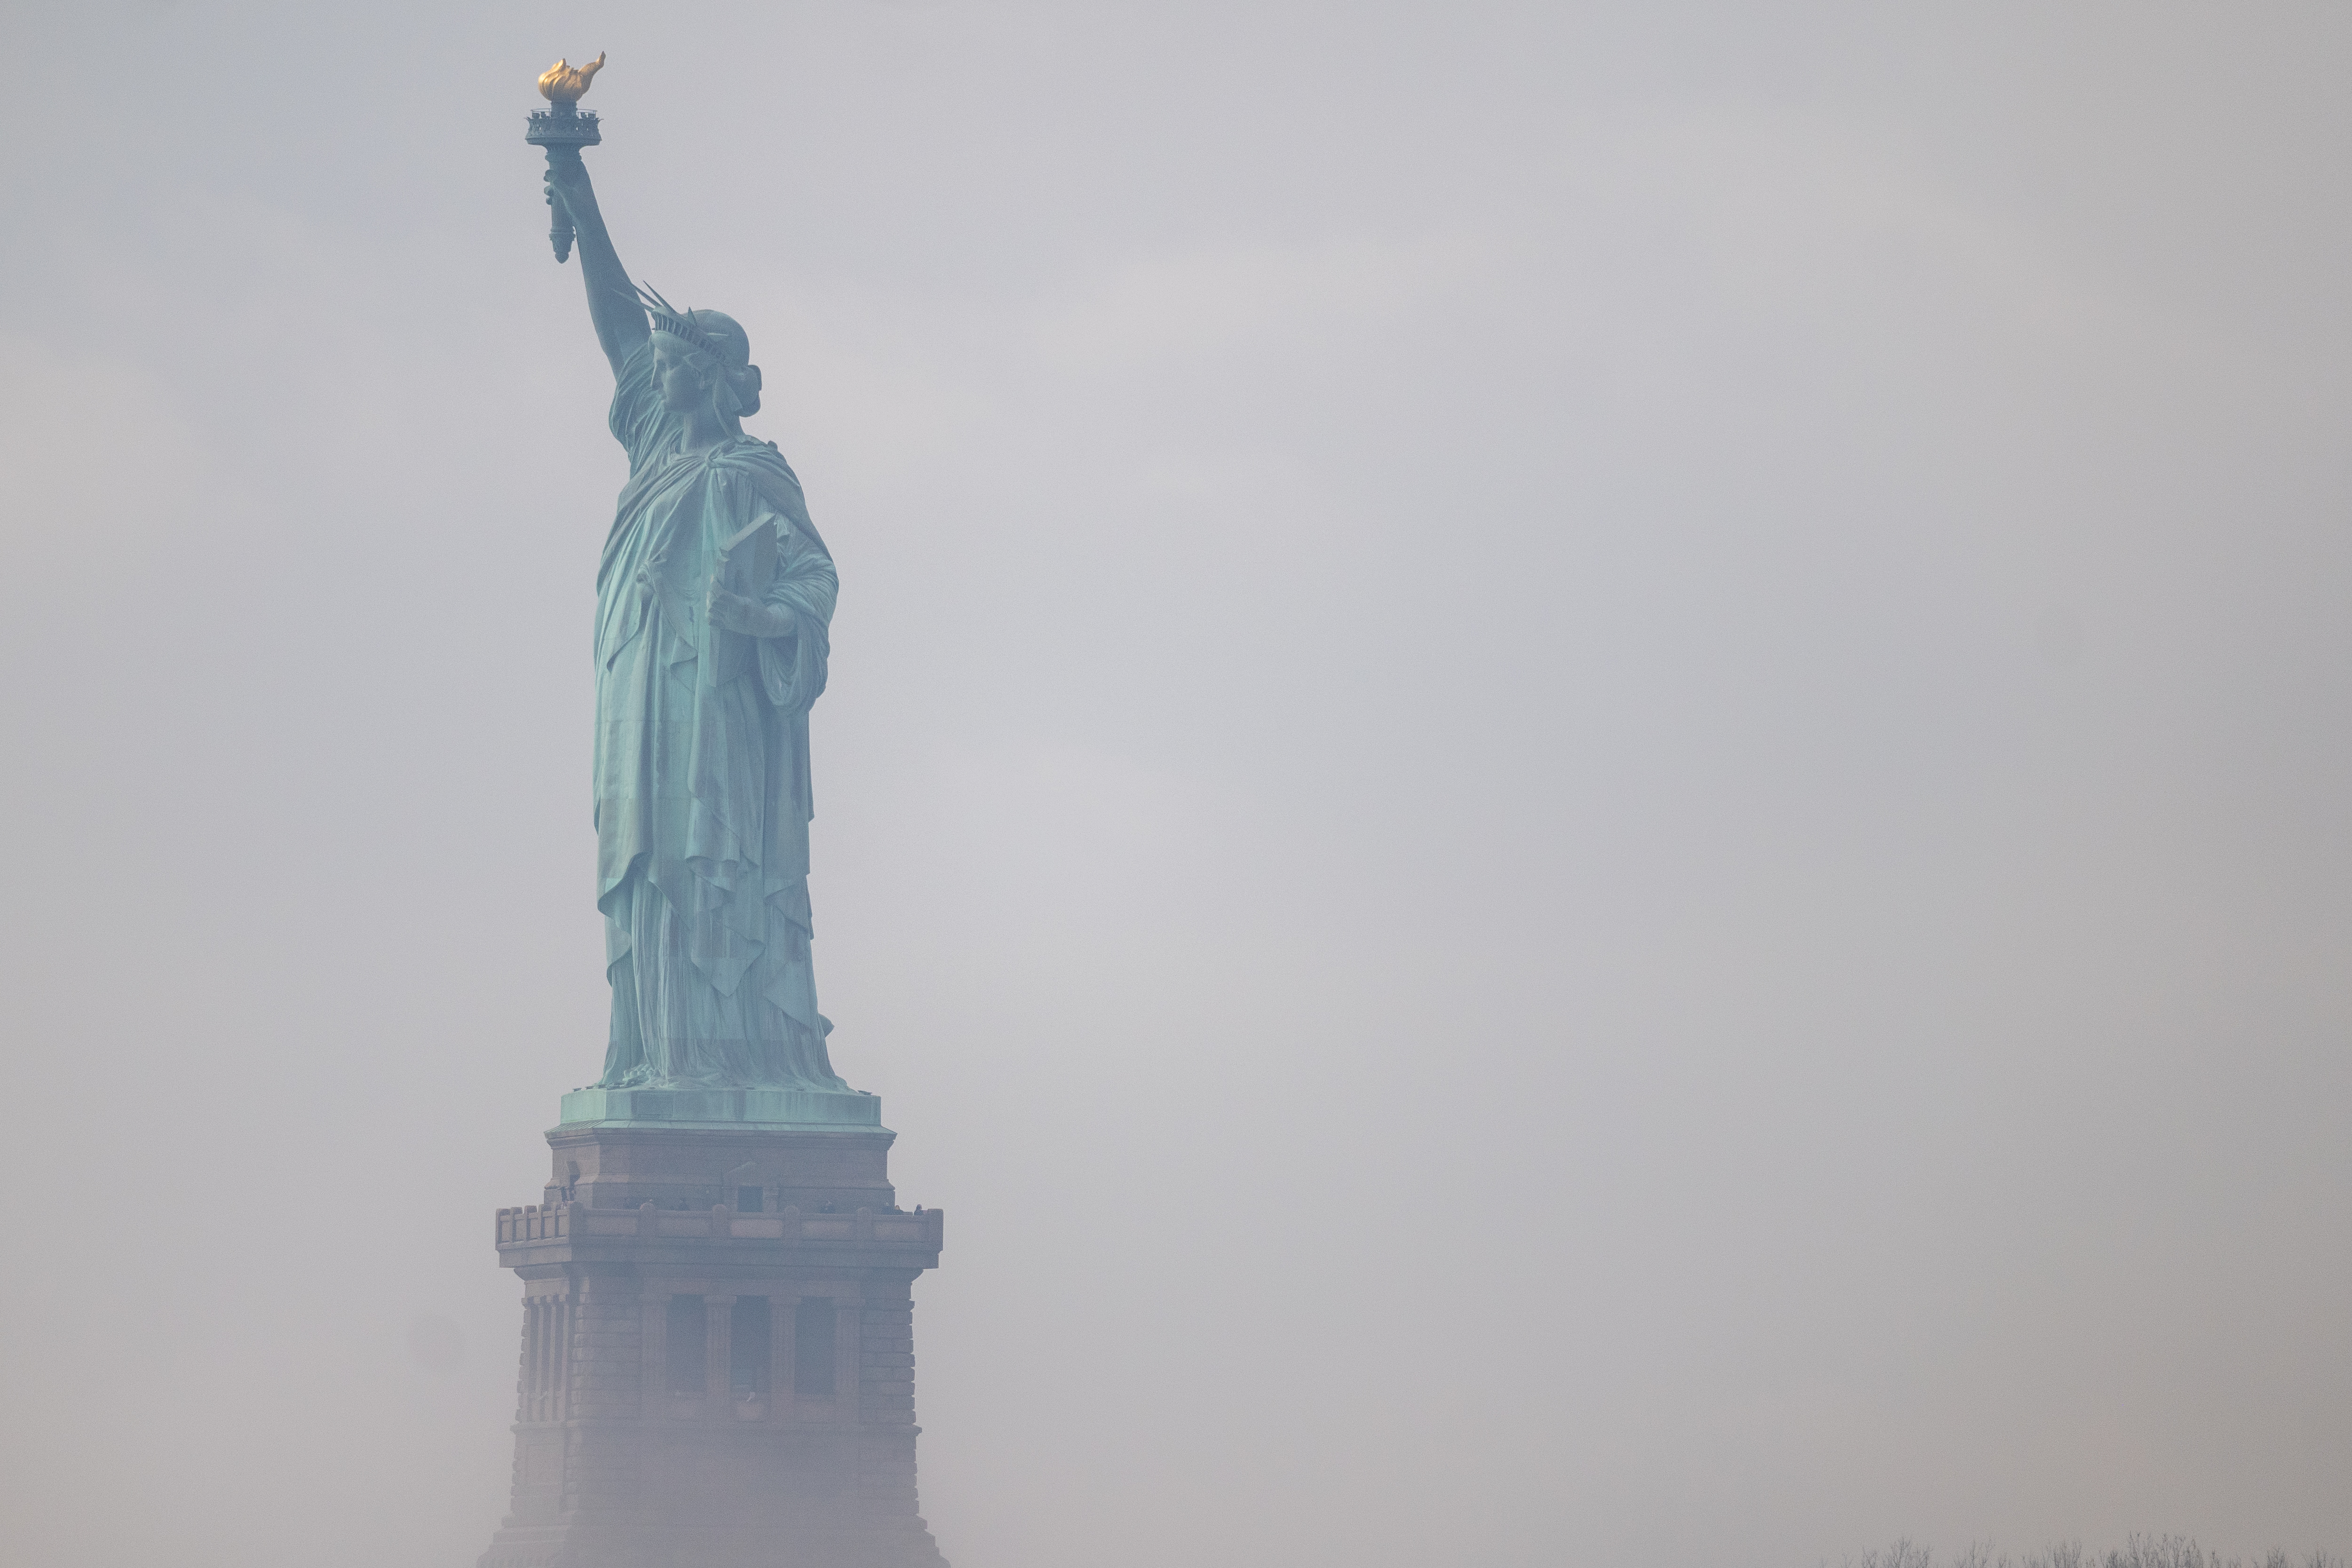 Side profile of the statue of liberty in the fog.